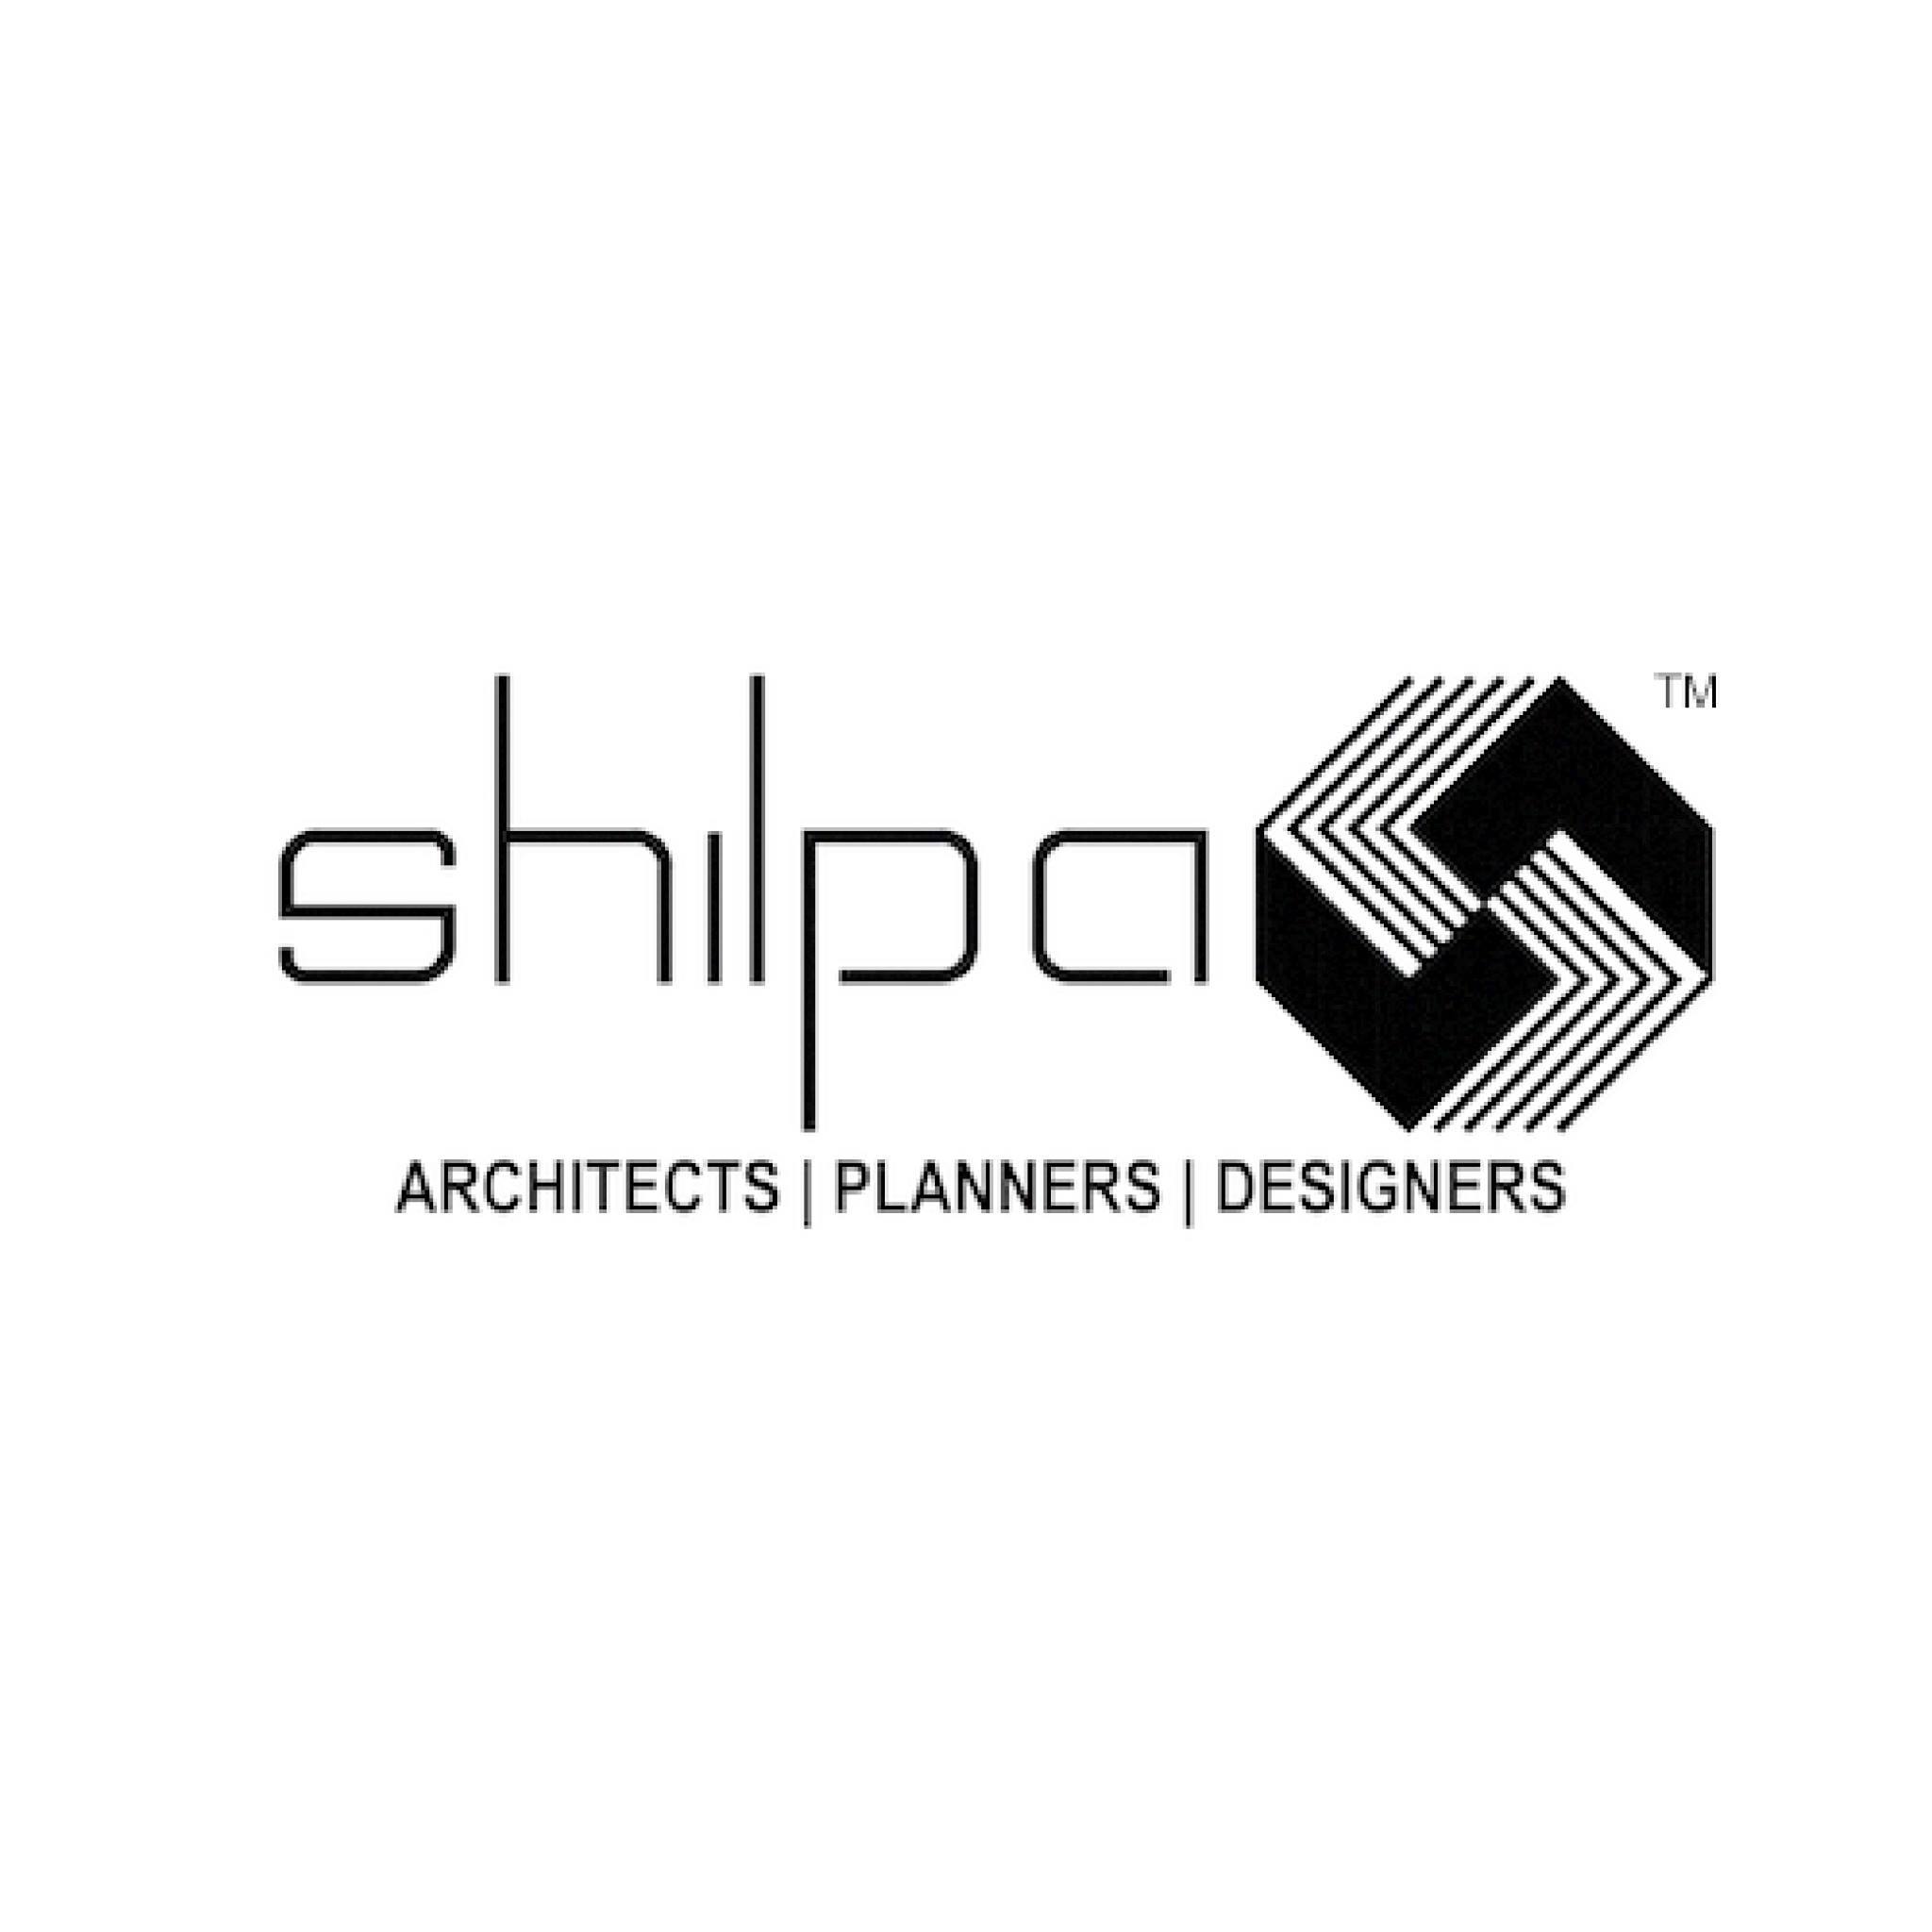 Shilpa Architects Planners Designers|Legal Services|Professional Services